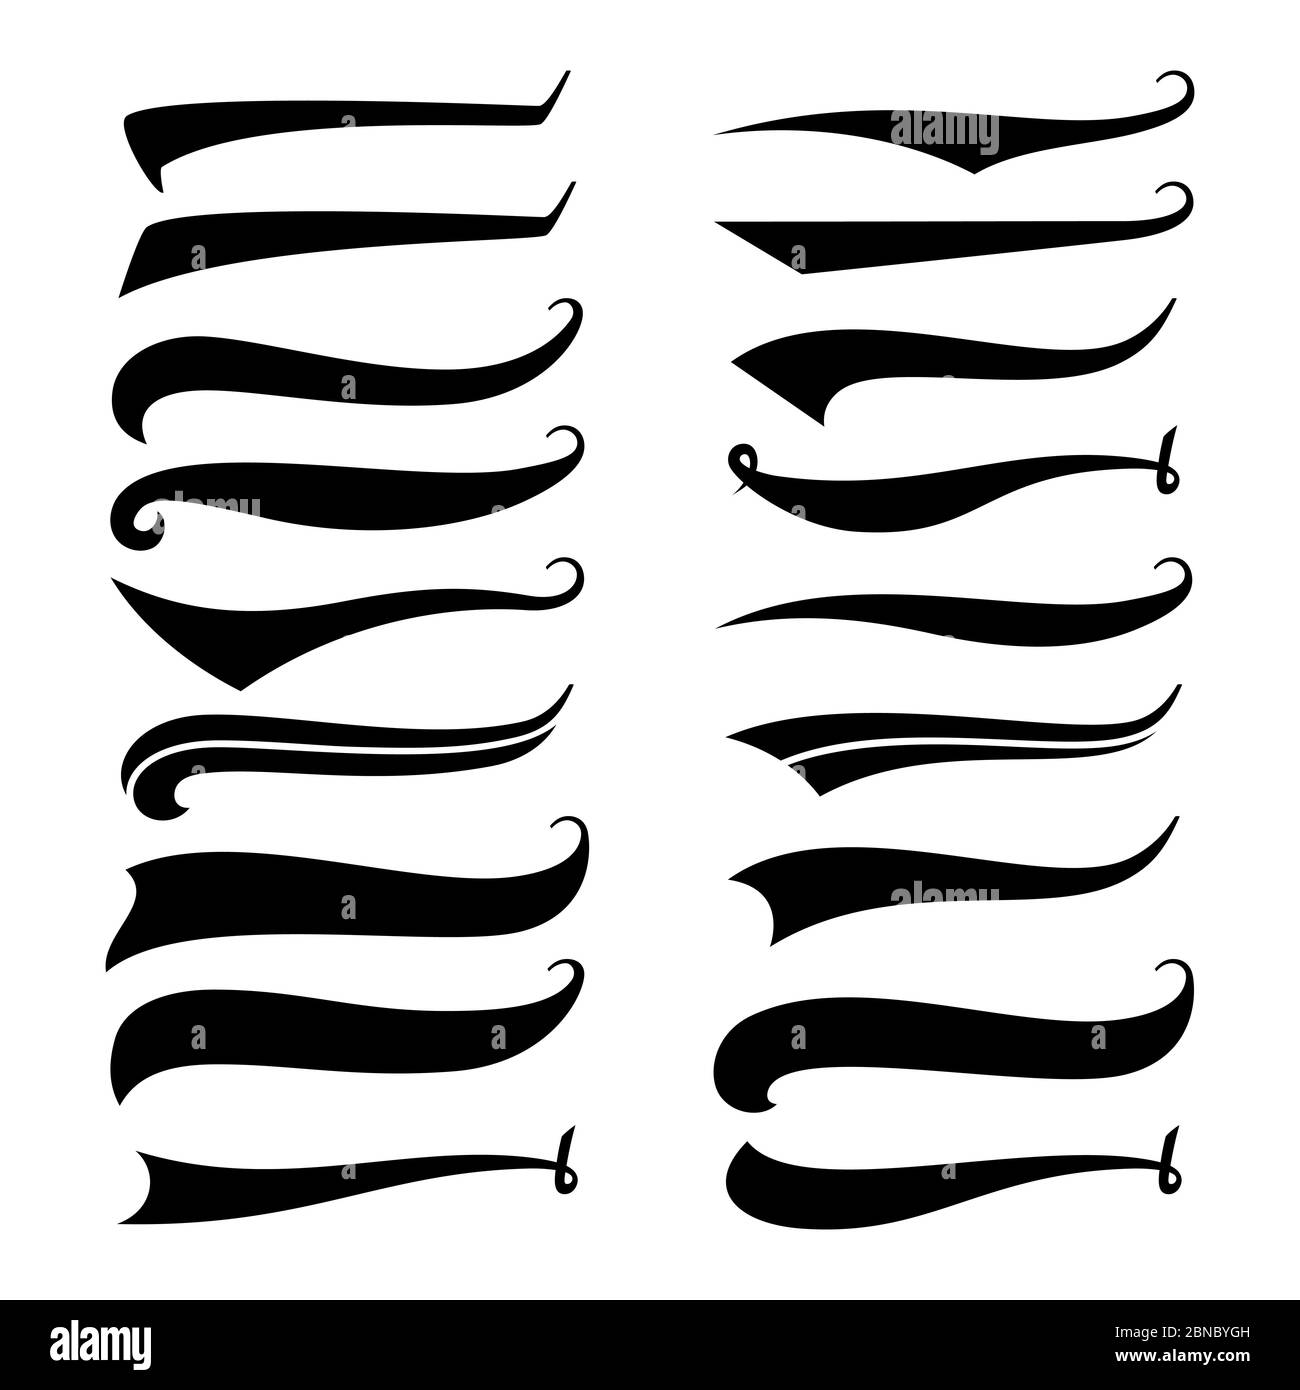 Swoosh and swash text tails vector set. Font tail for baseball sport logo  design. Swoosh, Swash, Swish, Swirl vector element, Set of Typography Tail  Stock Vector